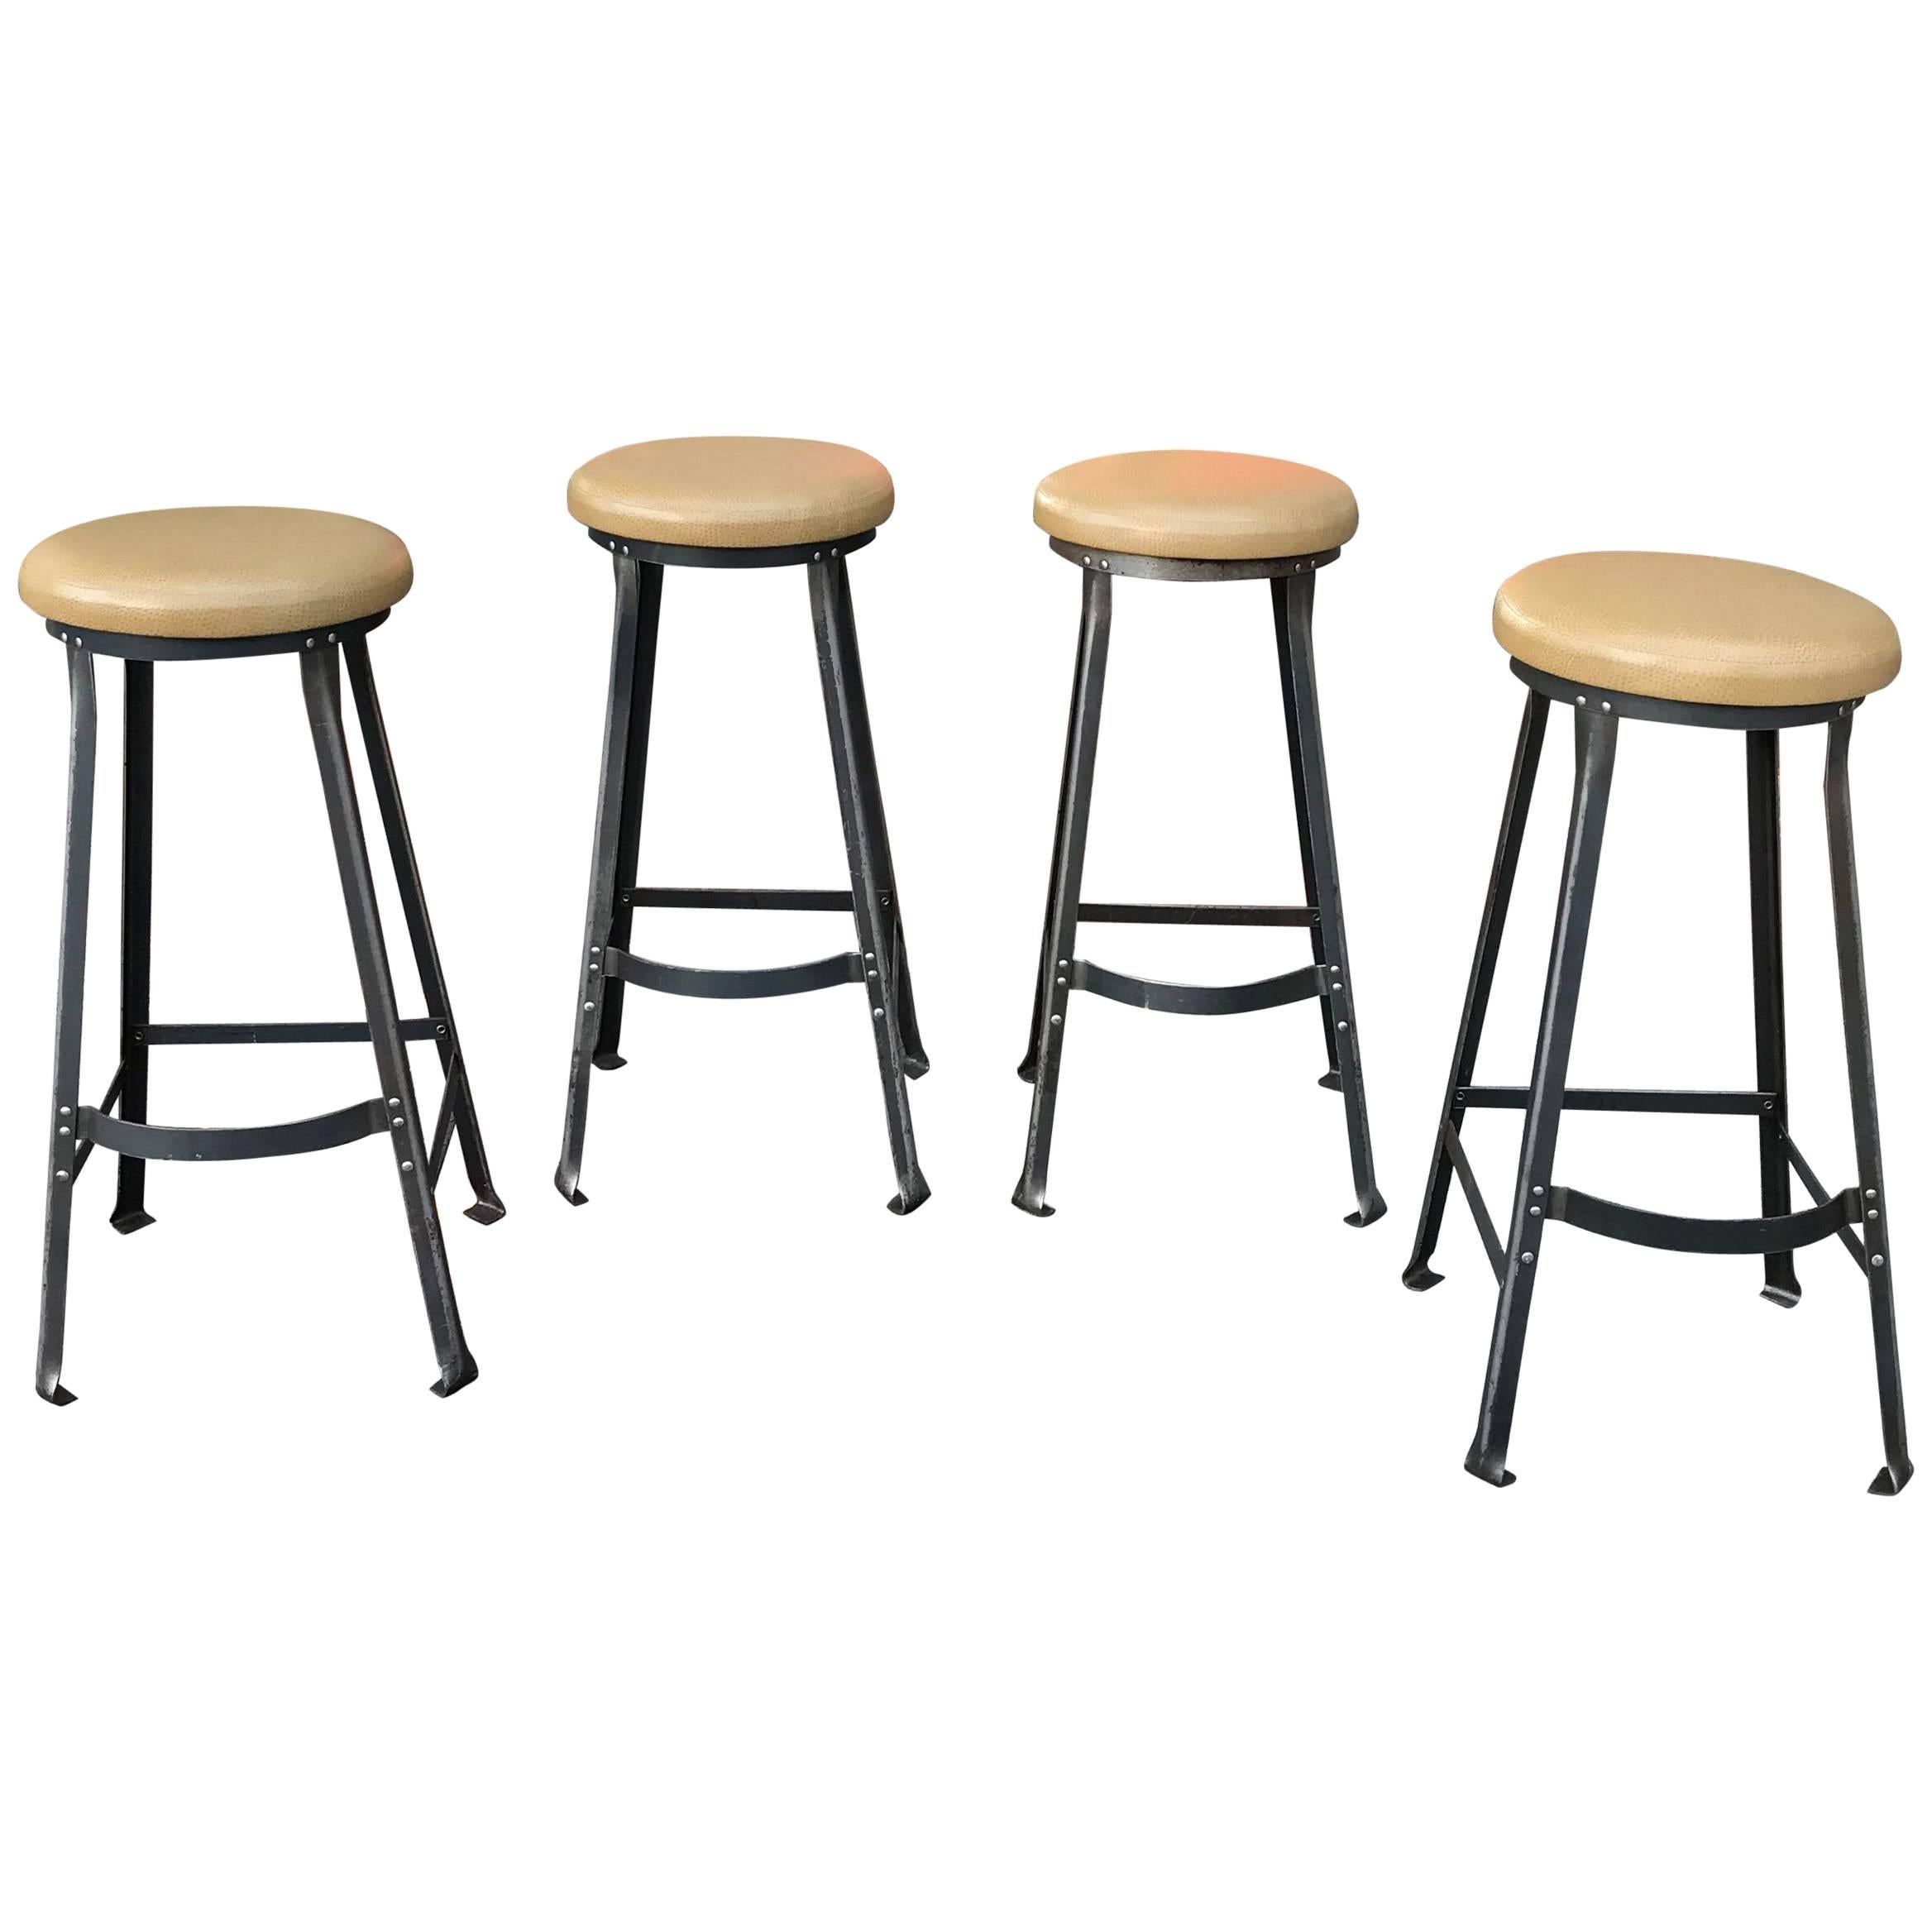 Industrial Midcentury Angle Iron and Faux Ostrich Barstools